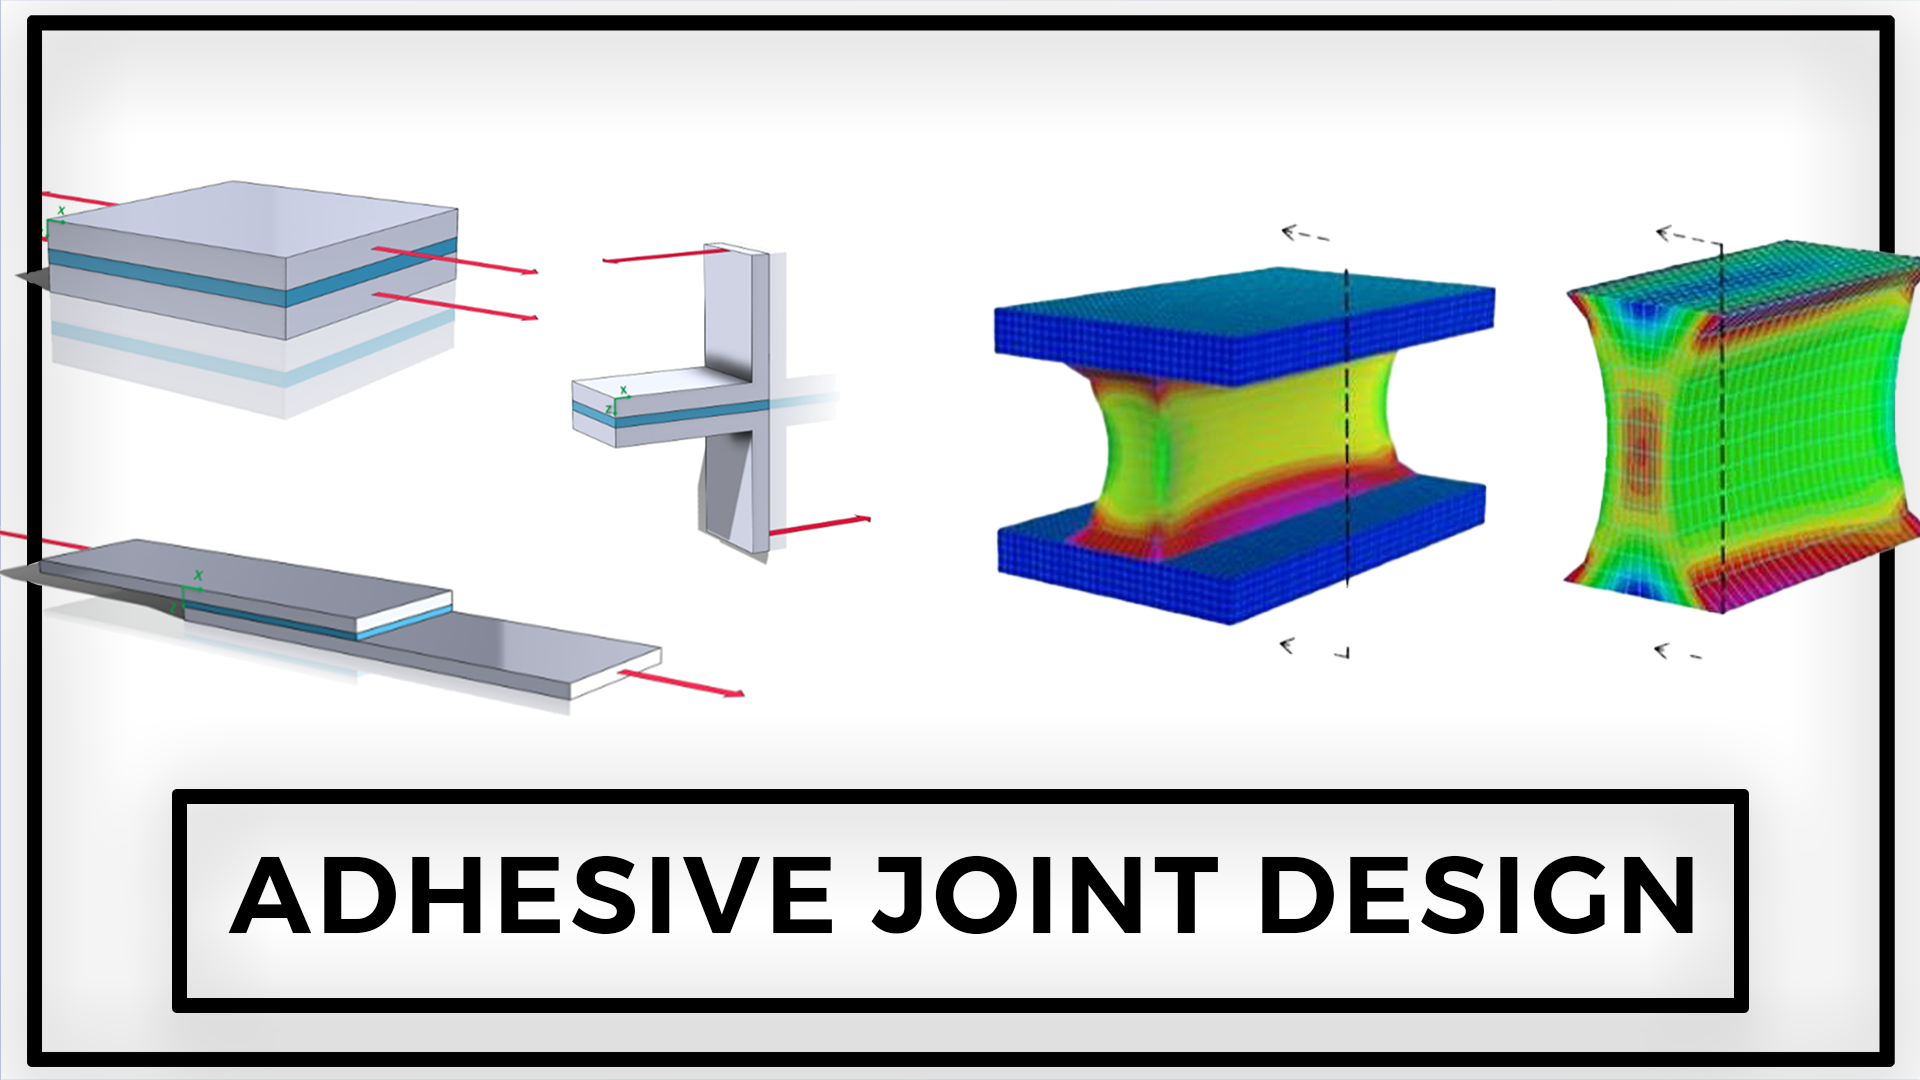 Adhesive Joint Design: calcbond's Ingenious Engineering Solution